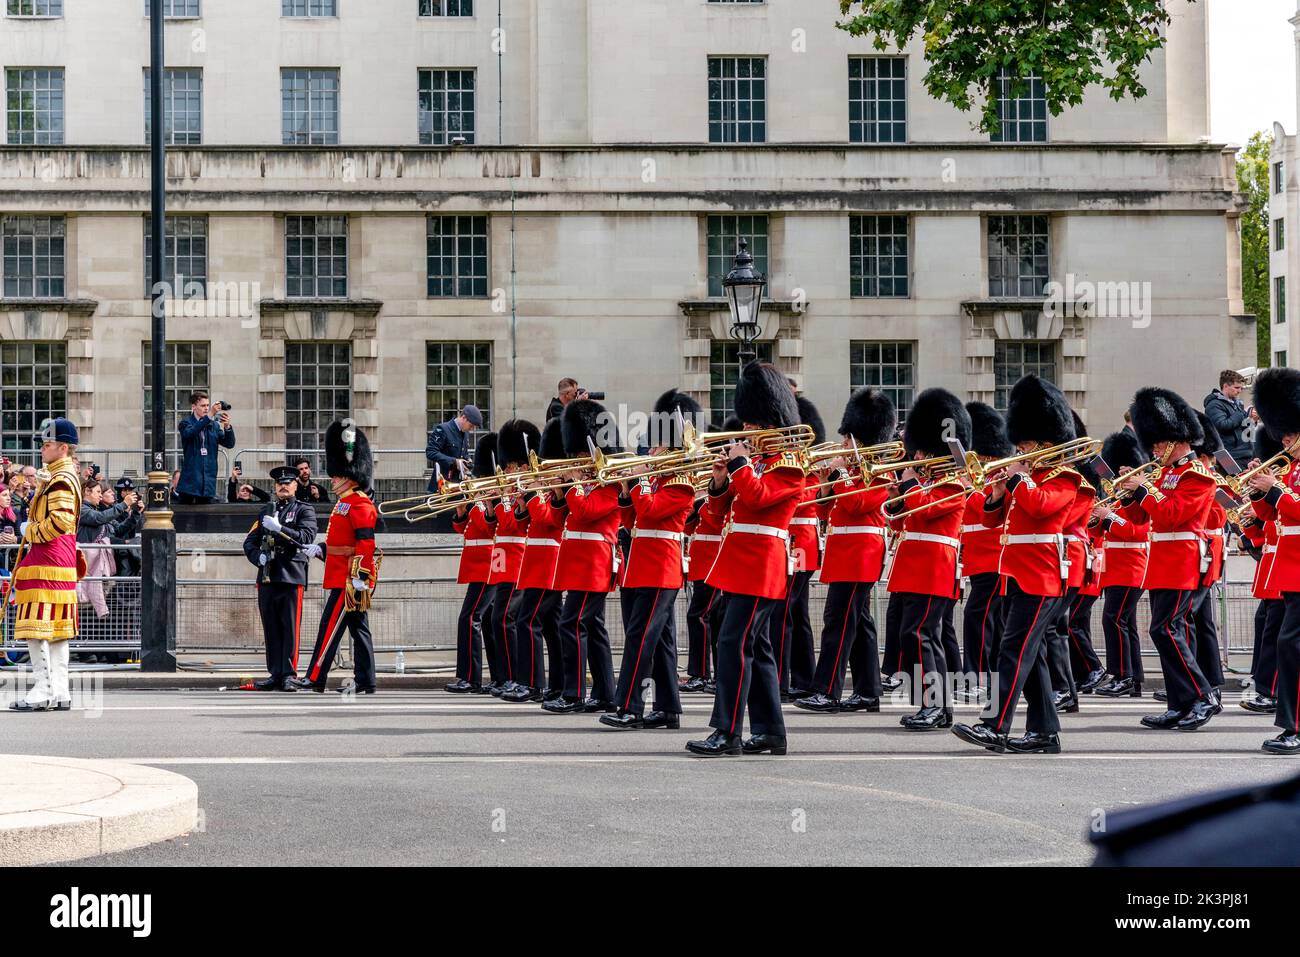 A Military Band Takes Part In Queen Elizabeth II Funeral Procession, Whitehall, London, UK. Stock Photo